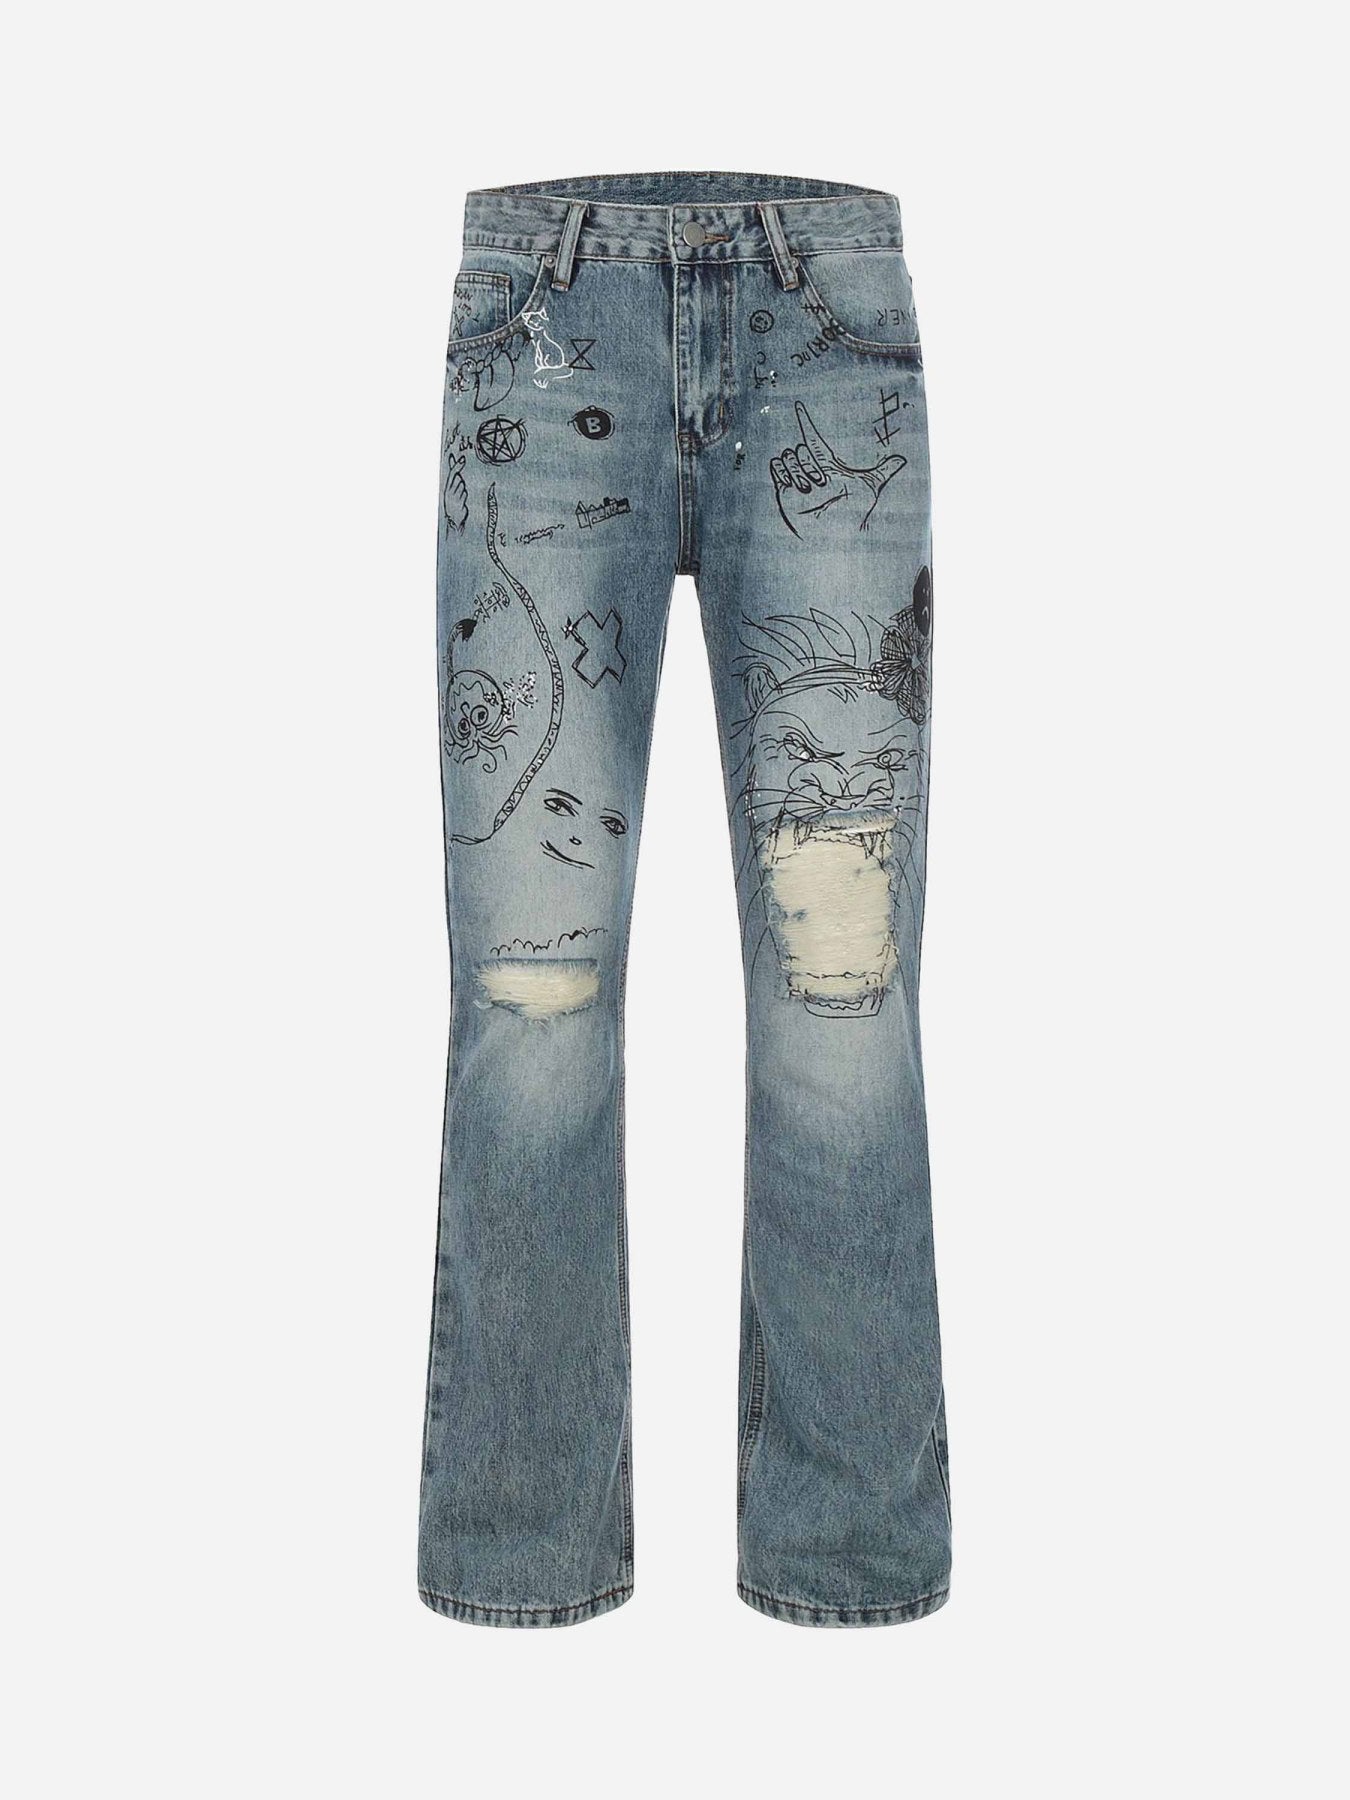 The Supermade Washed Graffiti Ripped Jeans